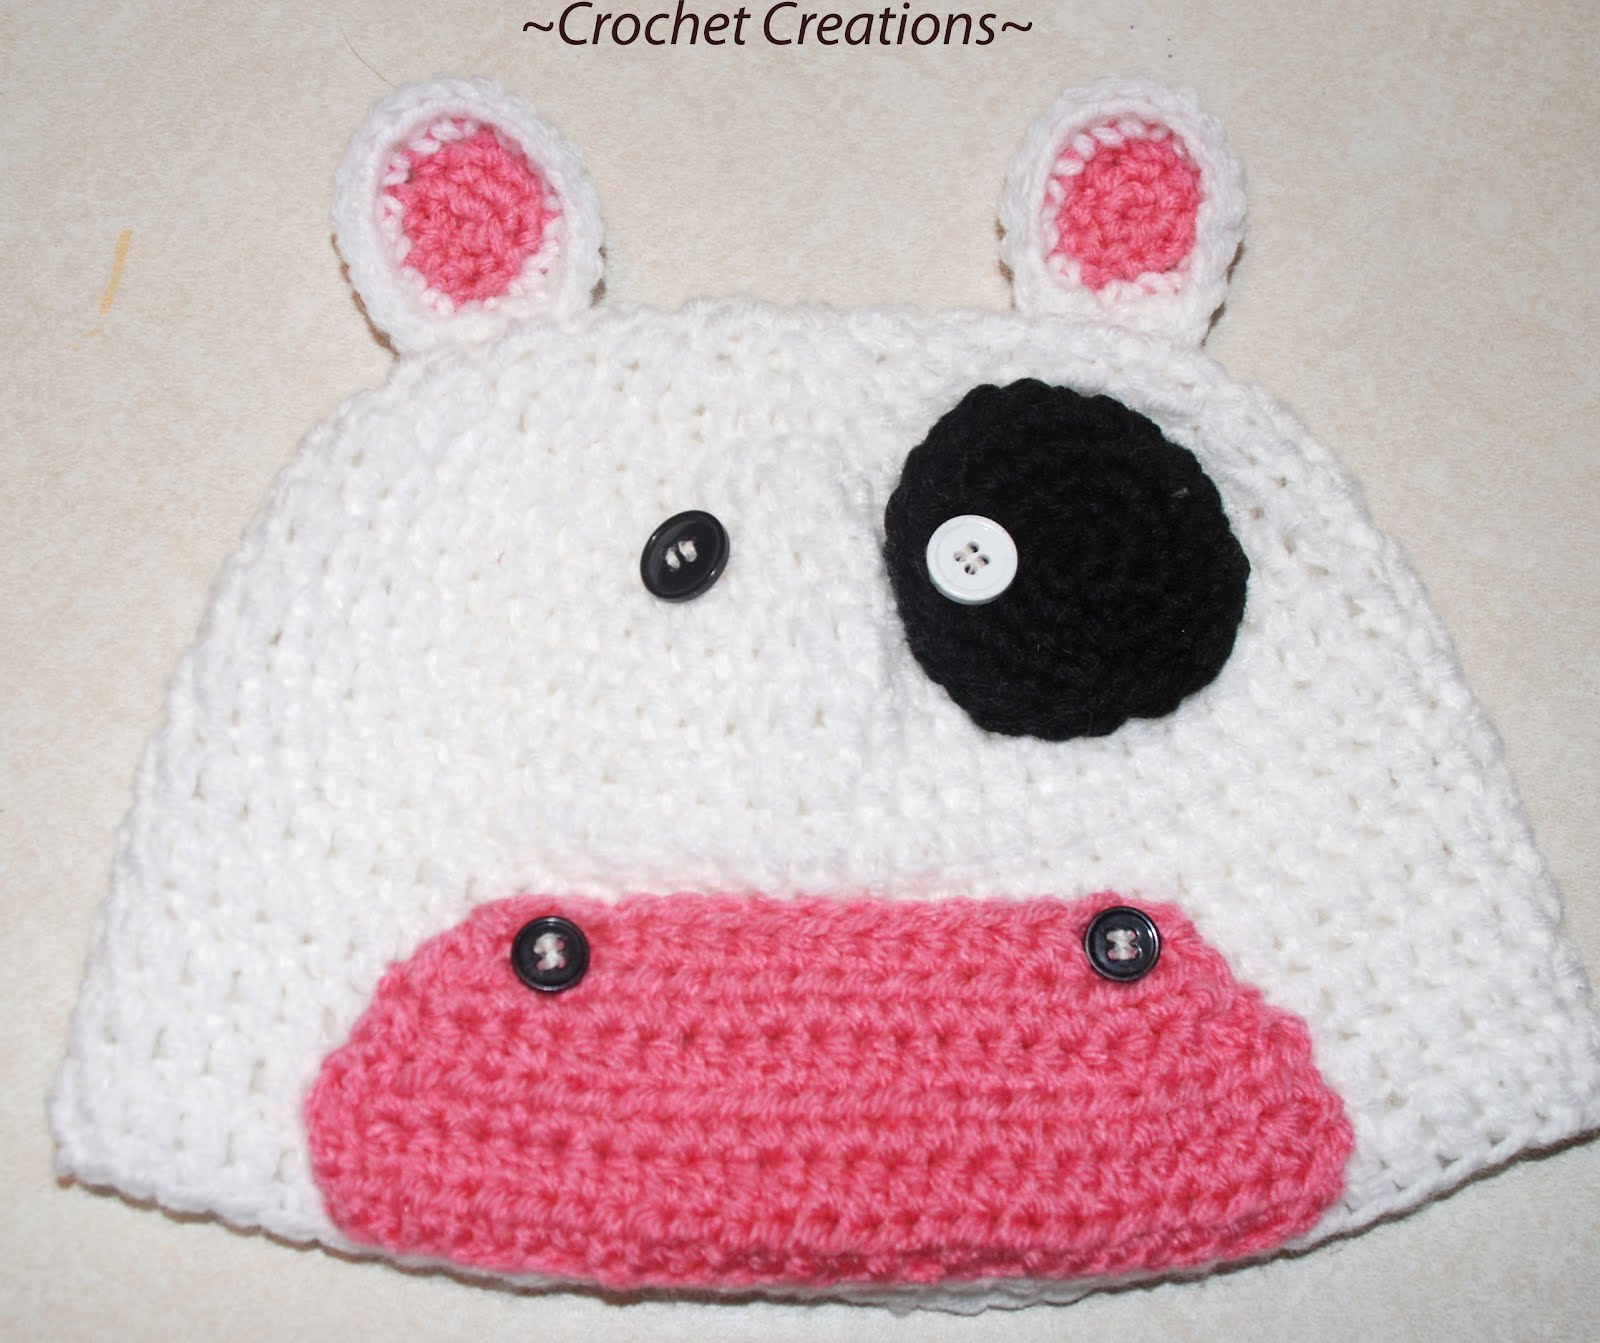 Crocheted Kid Hat Links - InReach - Business class colocation and